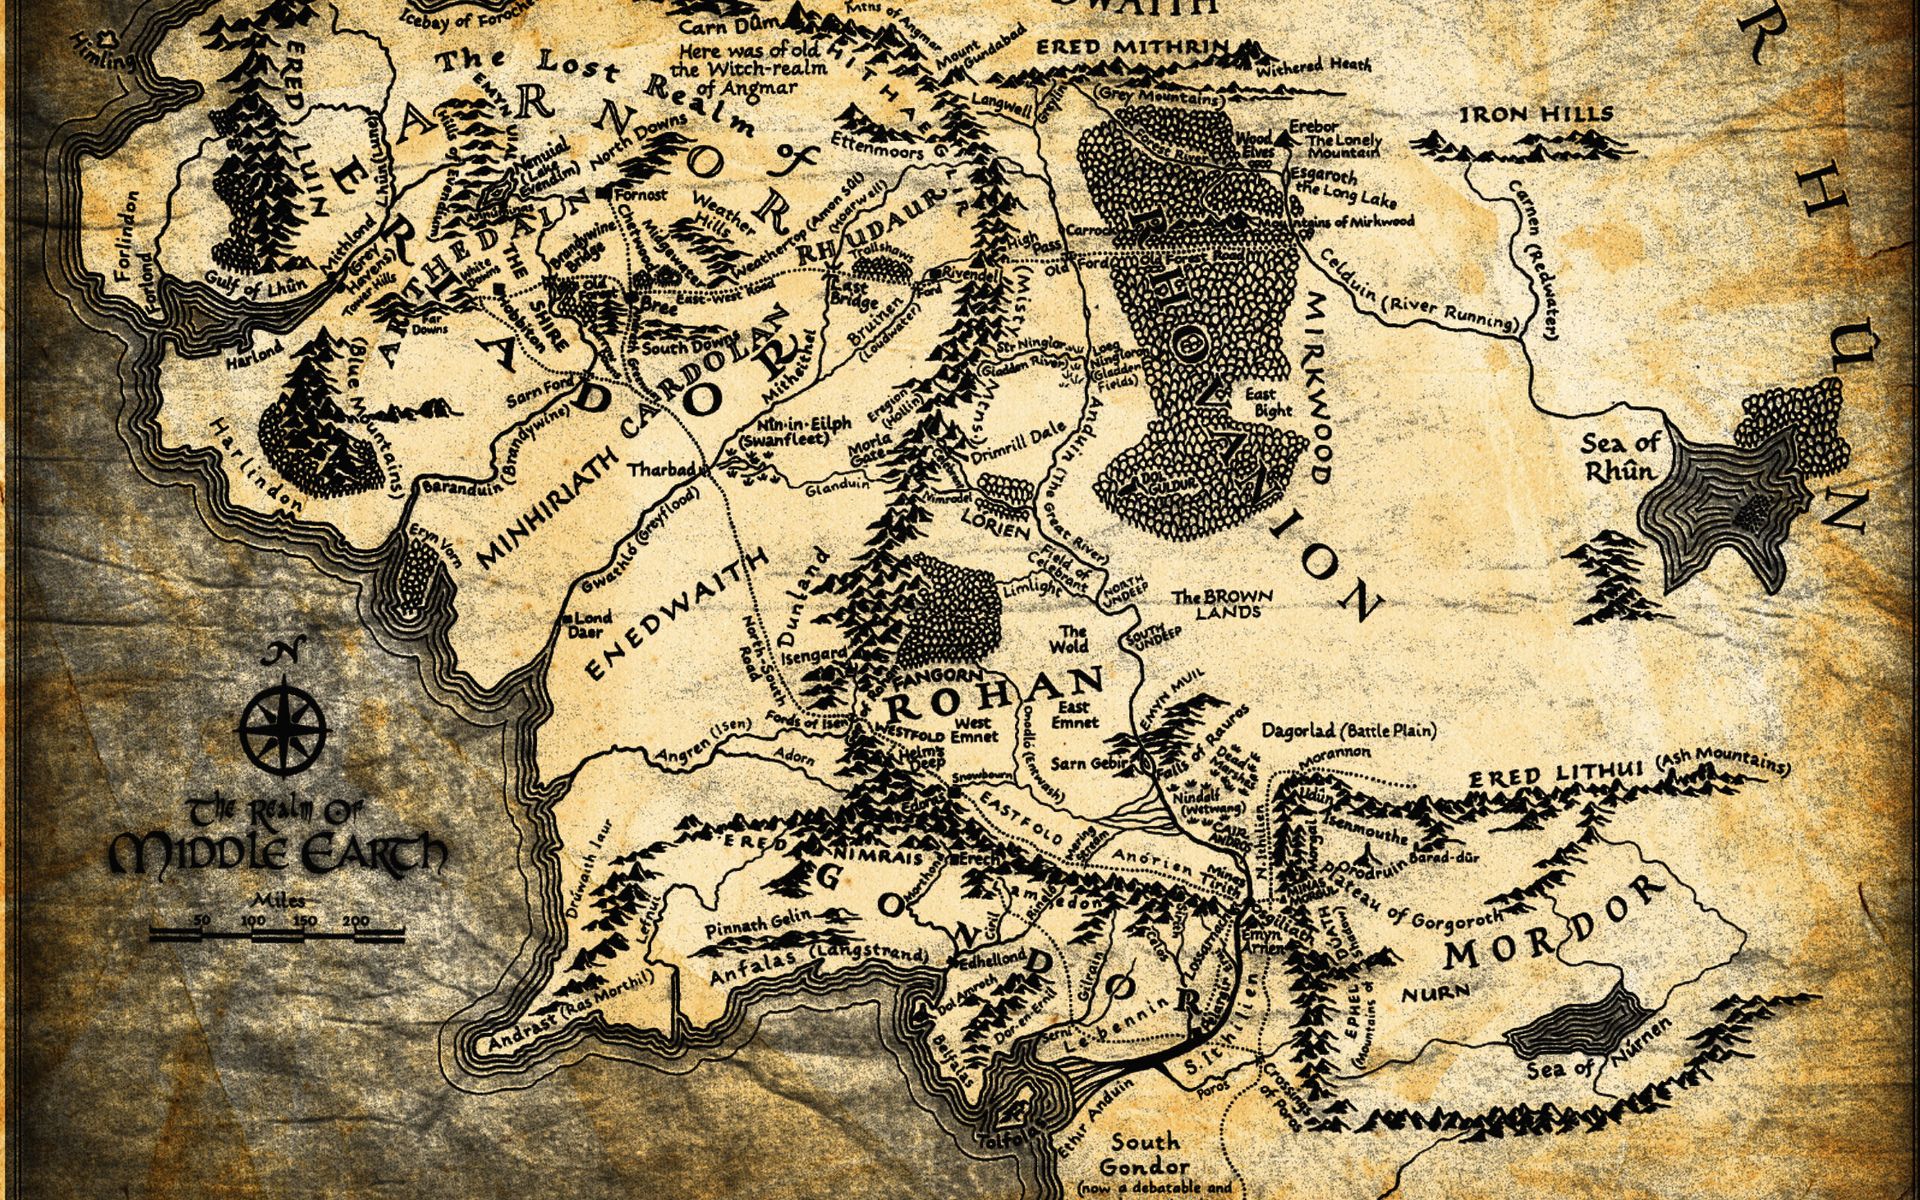 The Lord of the Rings fantasy map lotr wallpaper 1920x1200